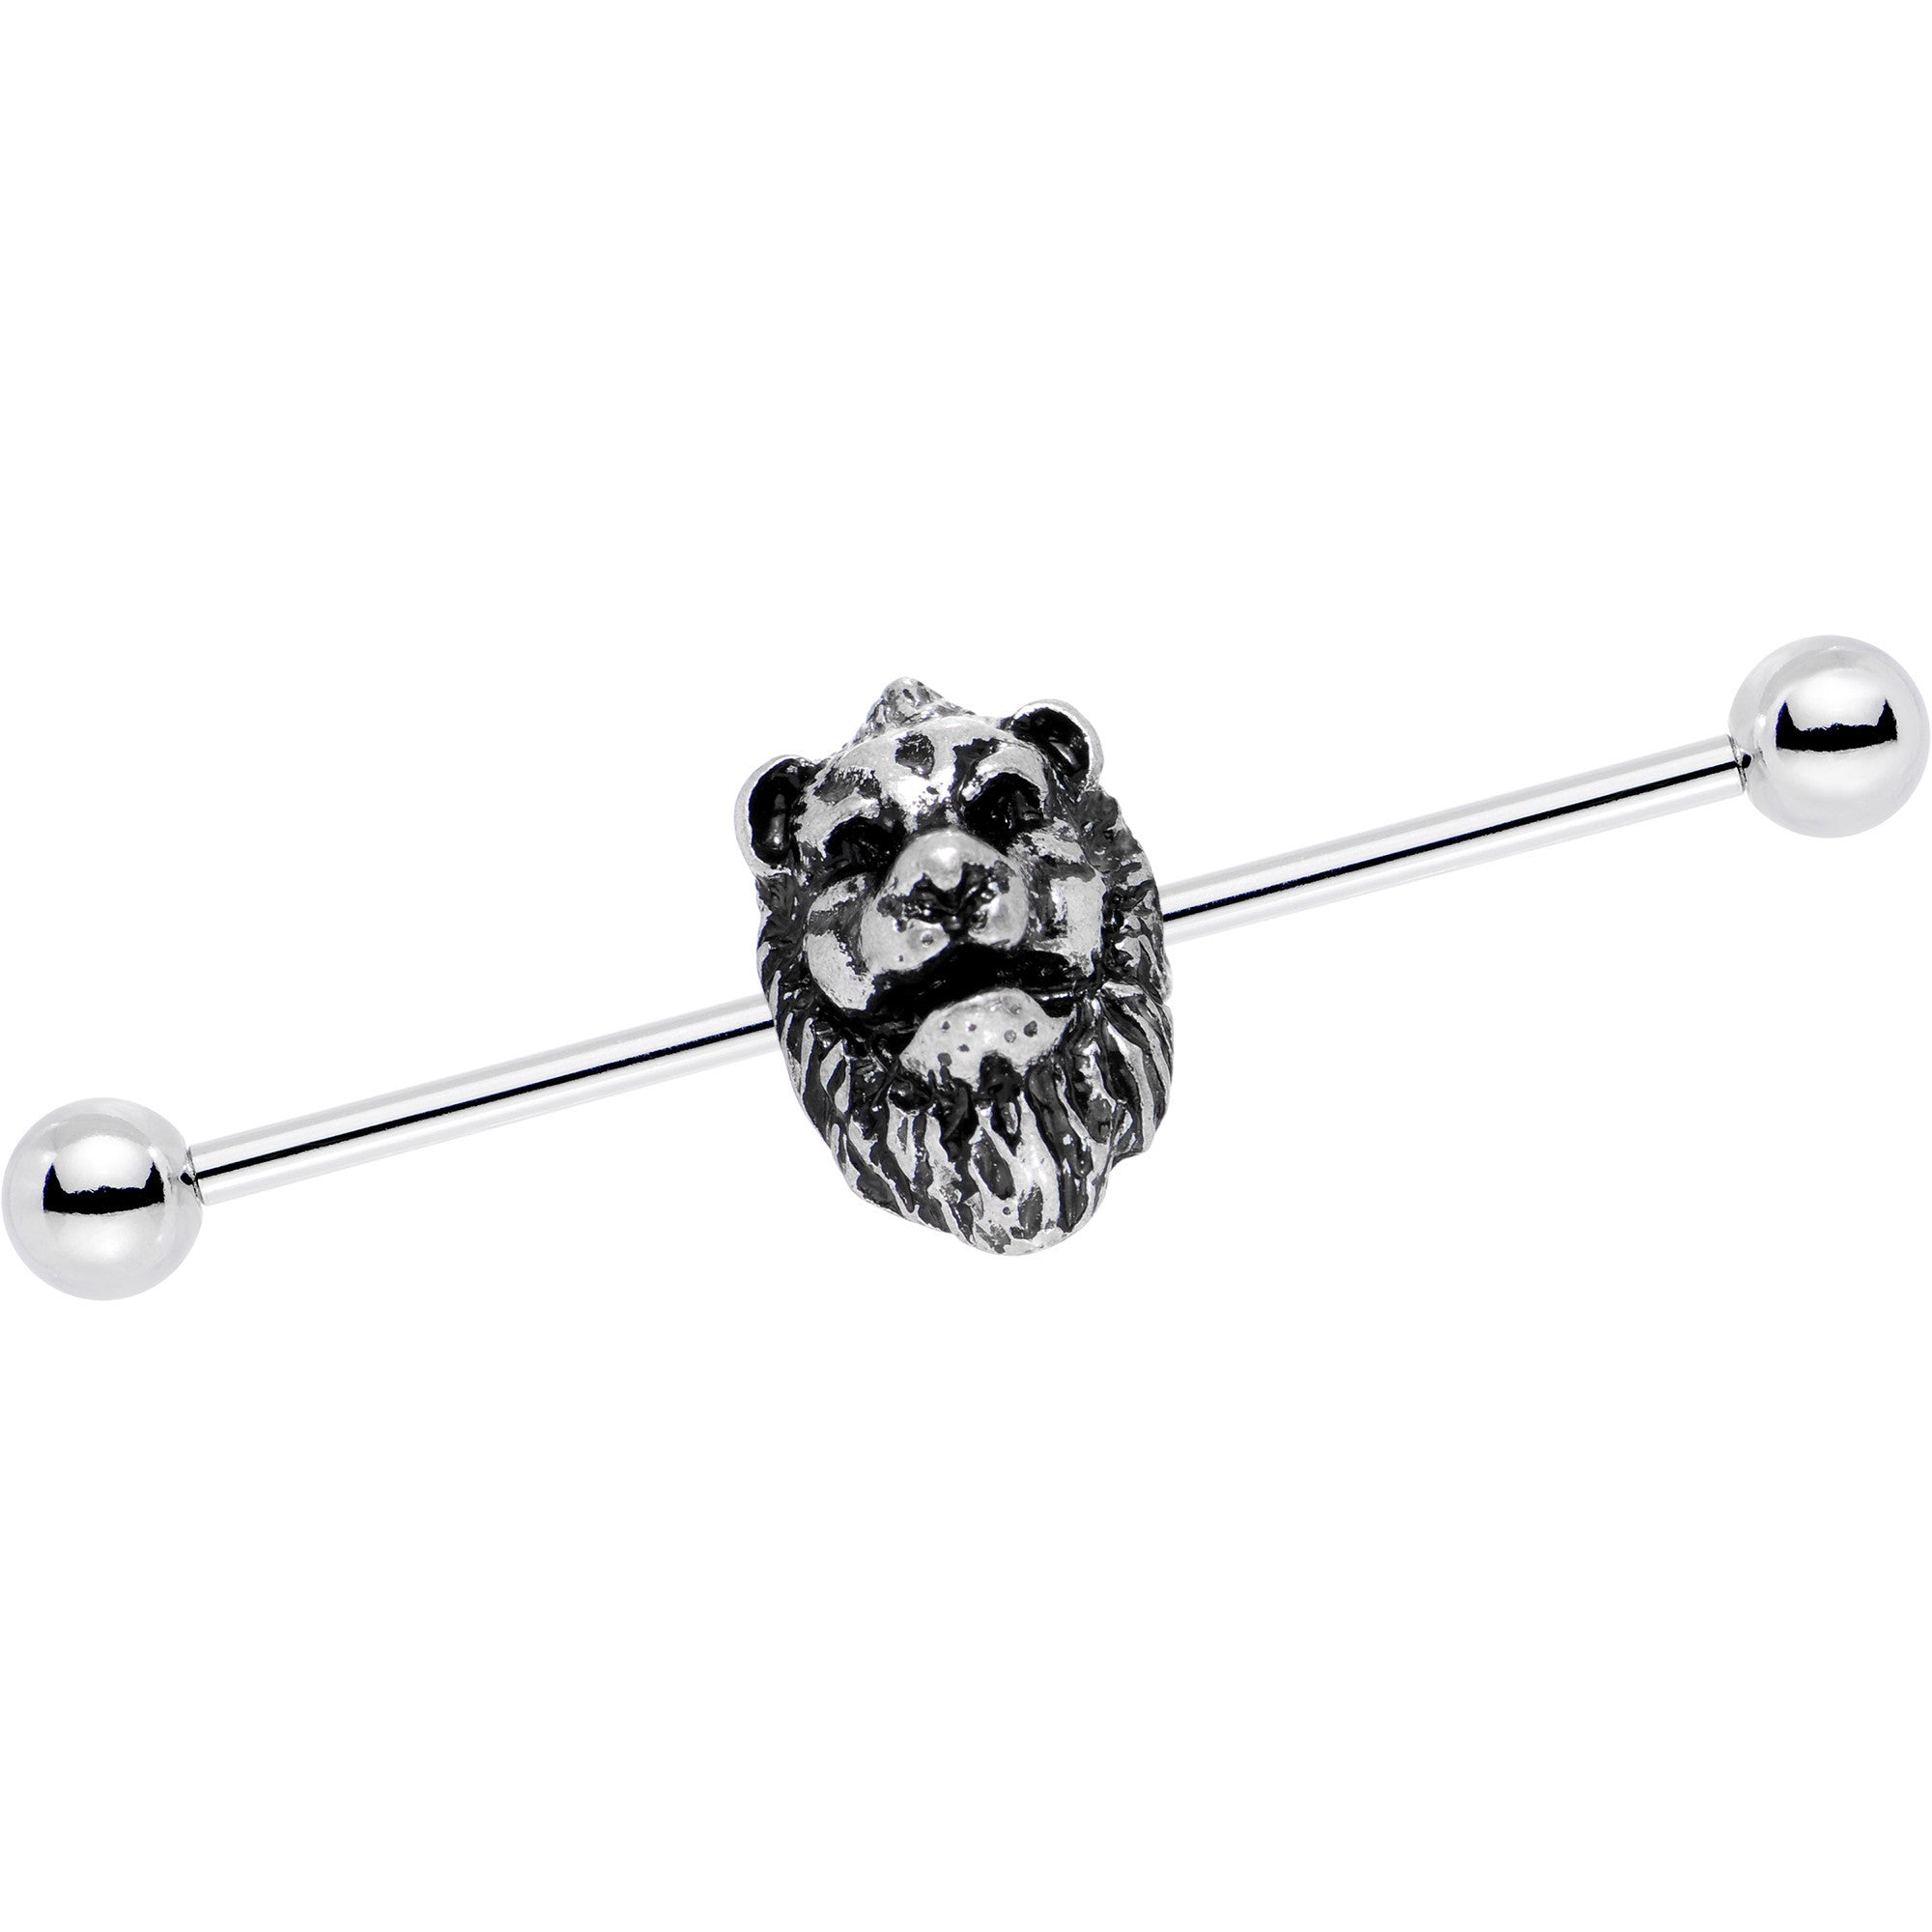 14 Gauge Fearsome Roaring Lion Charm Industrial Barbell 38mm